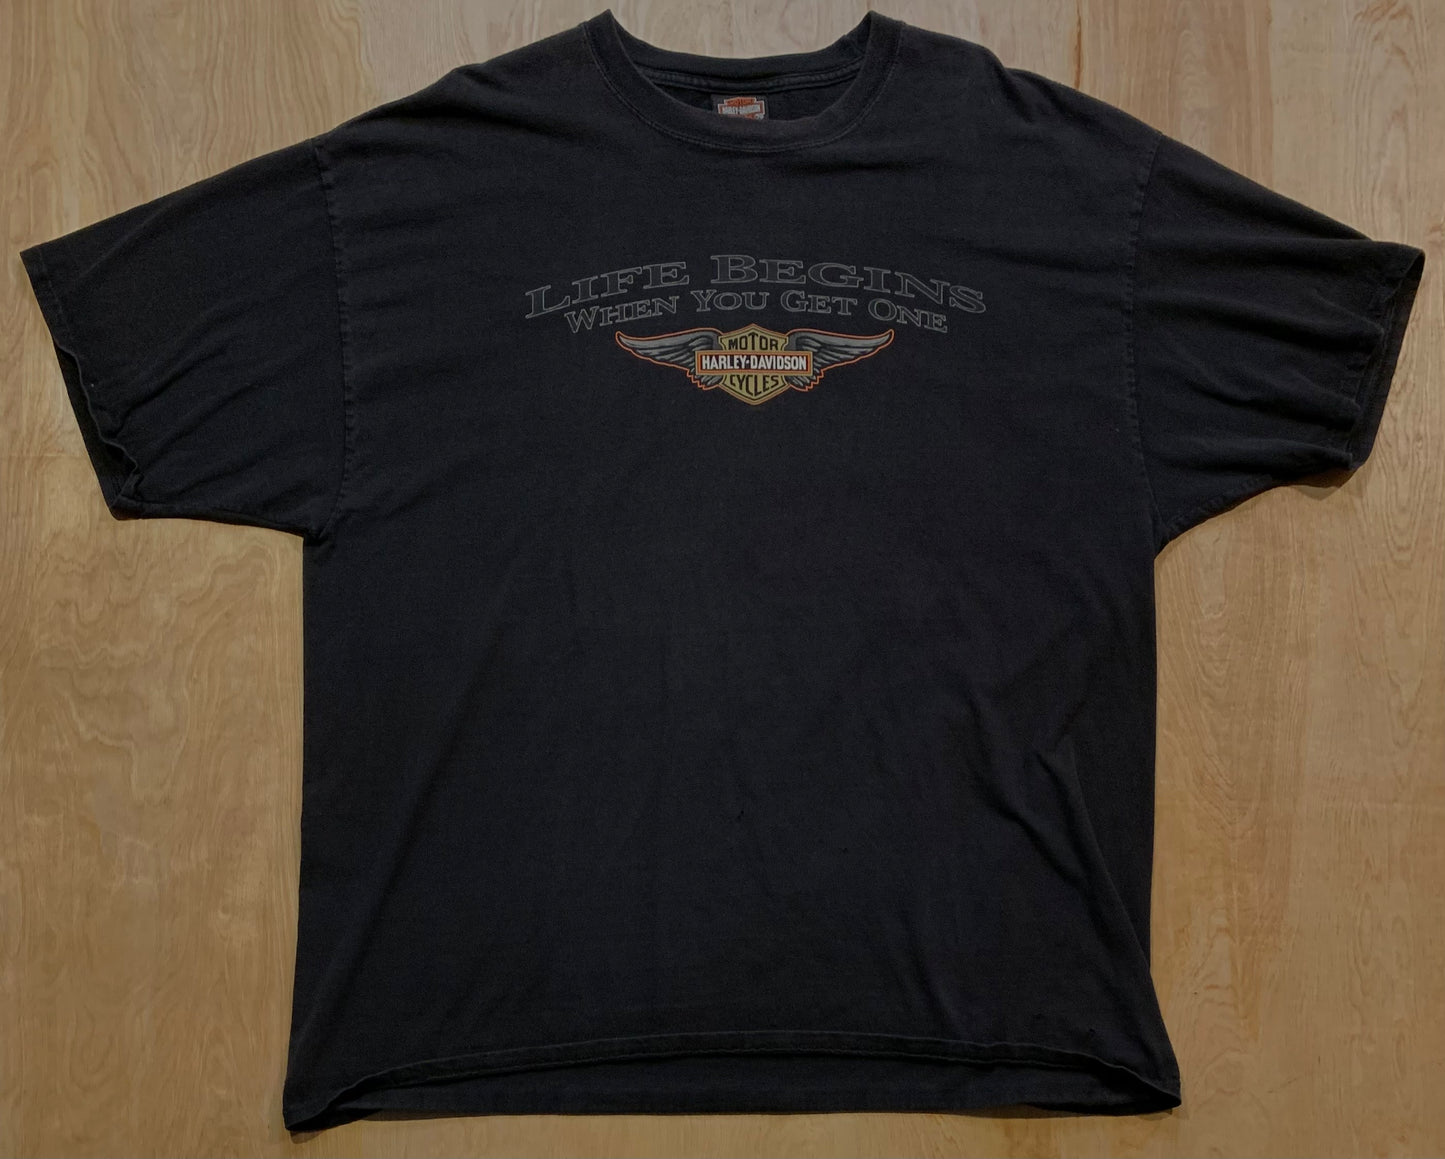 Harley Davidson "Life begins when you get one" Twin Cities T-Shirt